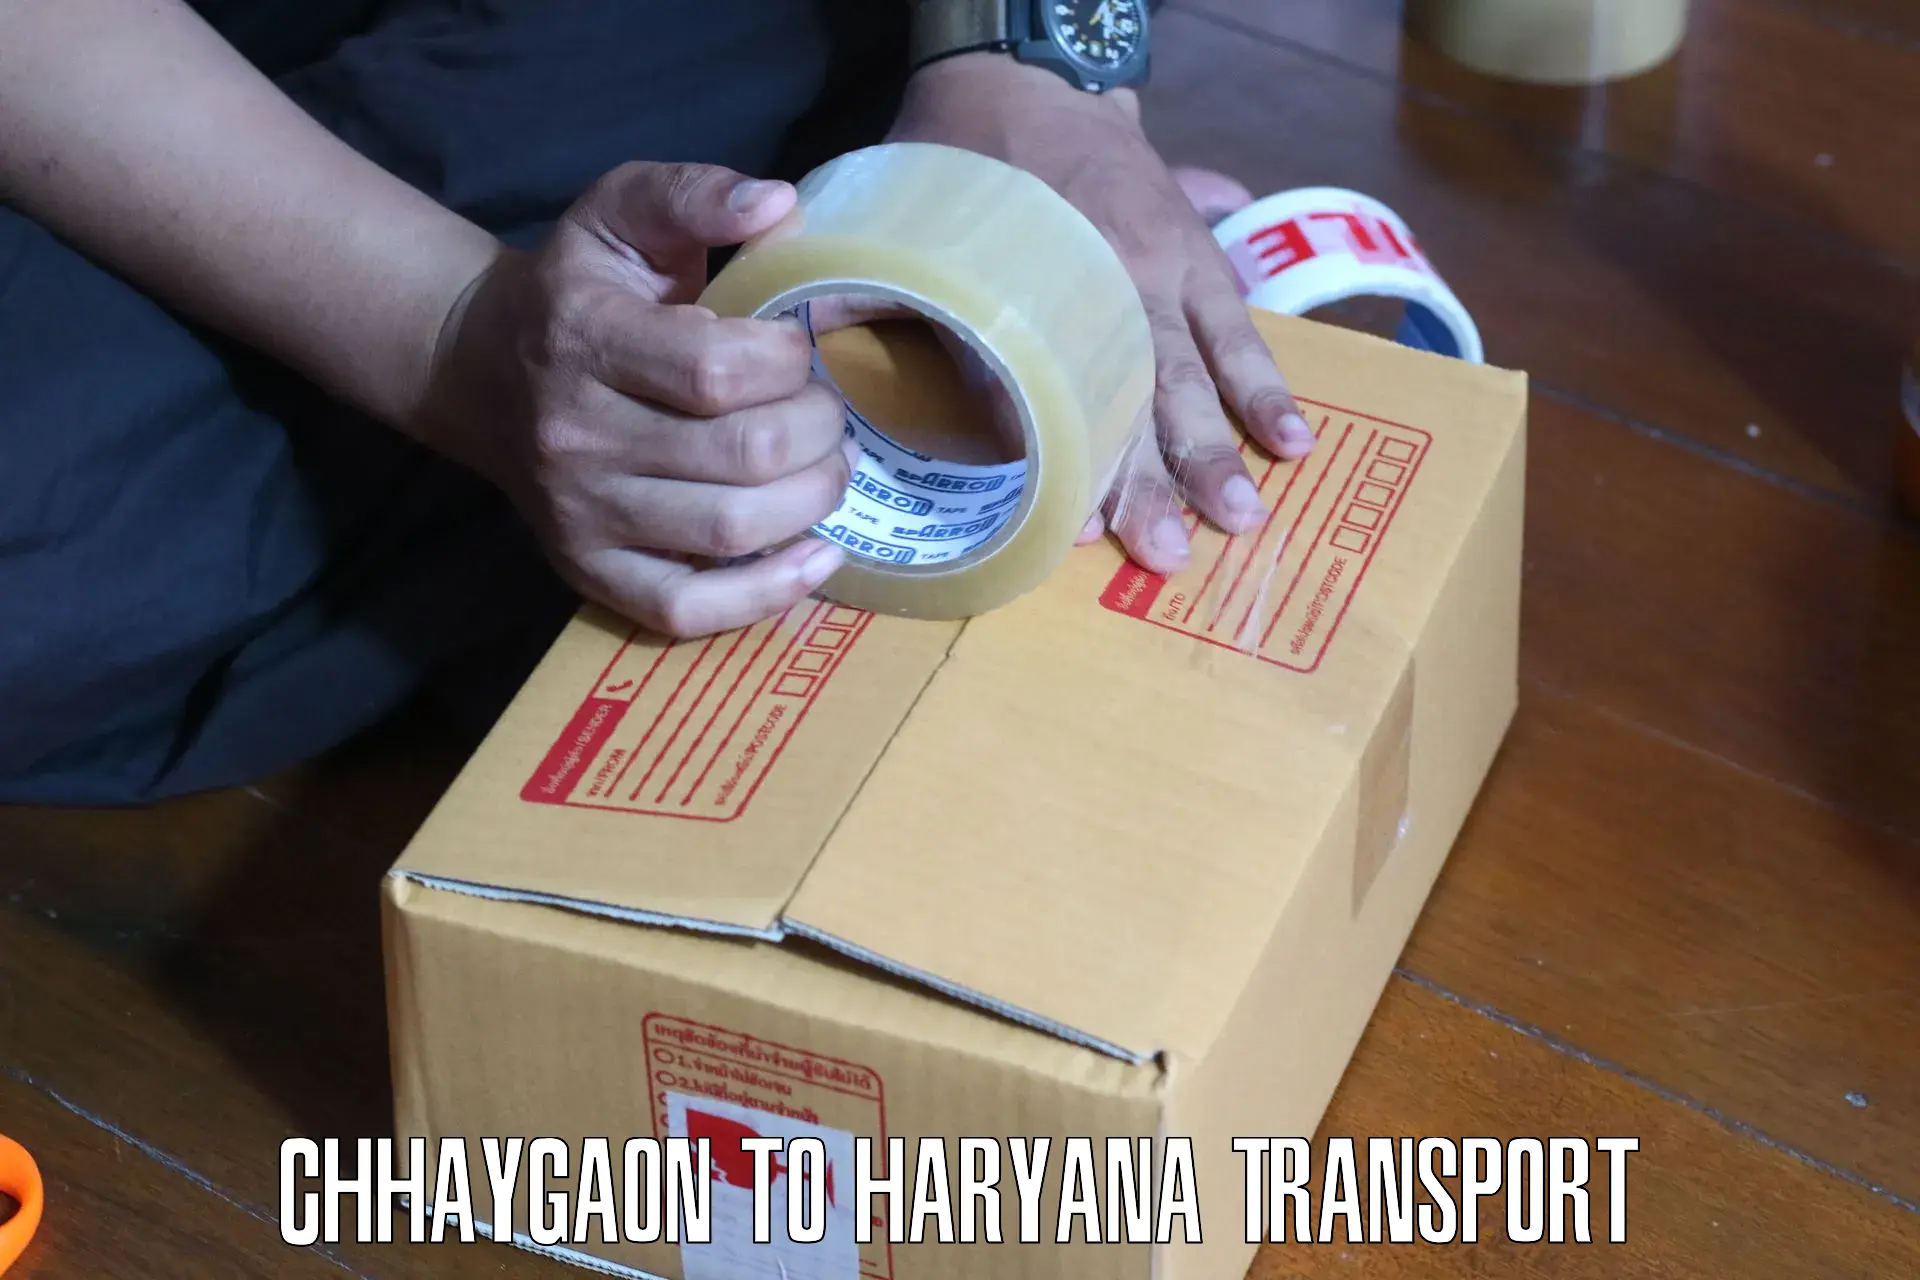 Container transport service Chhaygaon to Dharuhera